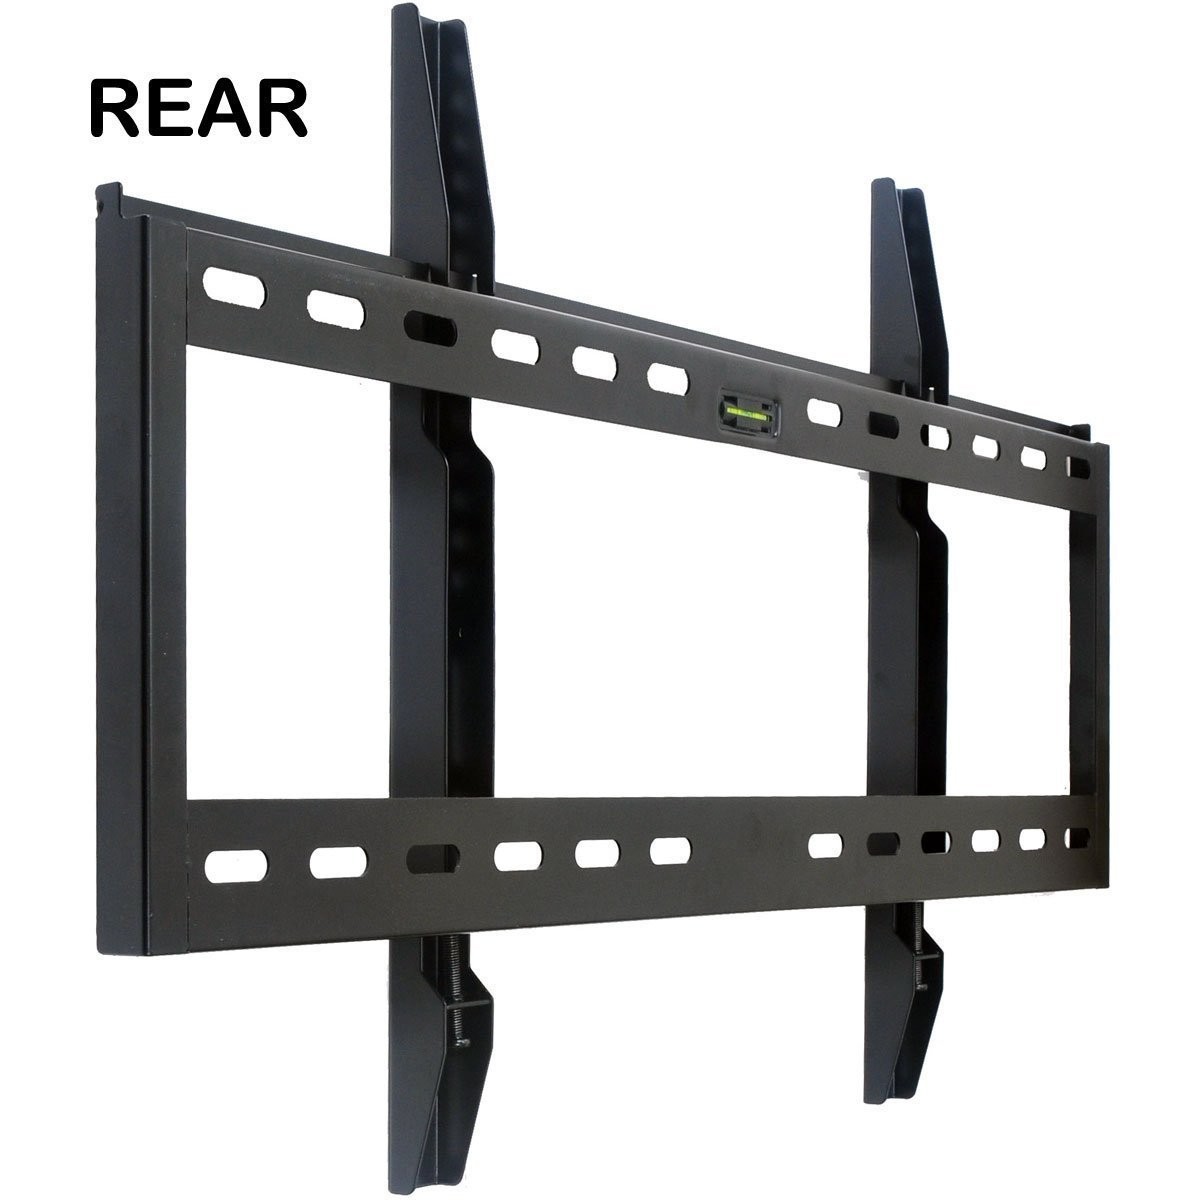 VideoSecu Heavy Duty TV Wall Mount for Sony 40 43 48 49 50 55 60 65 75 Inch XBR-49X800E XBR-55A1E XBR-55X930D XBR-55X930E XBR-65A1E XBR-65X850E LED LCD Plasma Flat Panel Screen HDTV Display MN7 - image 2 of 3